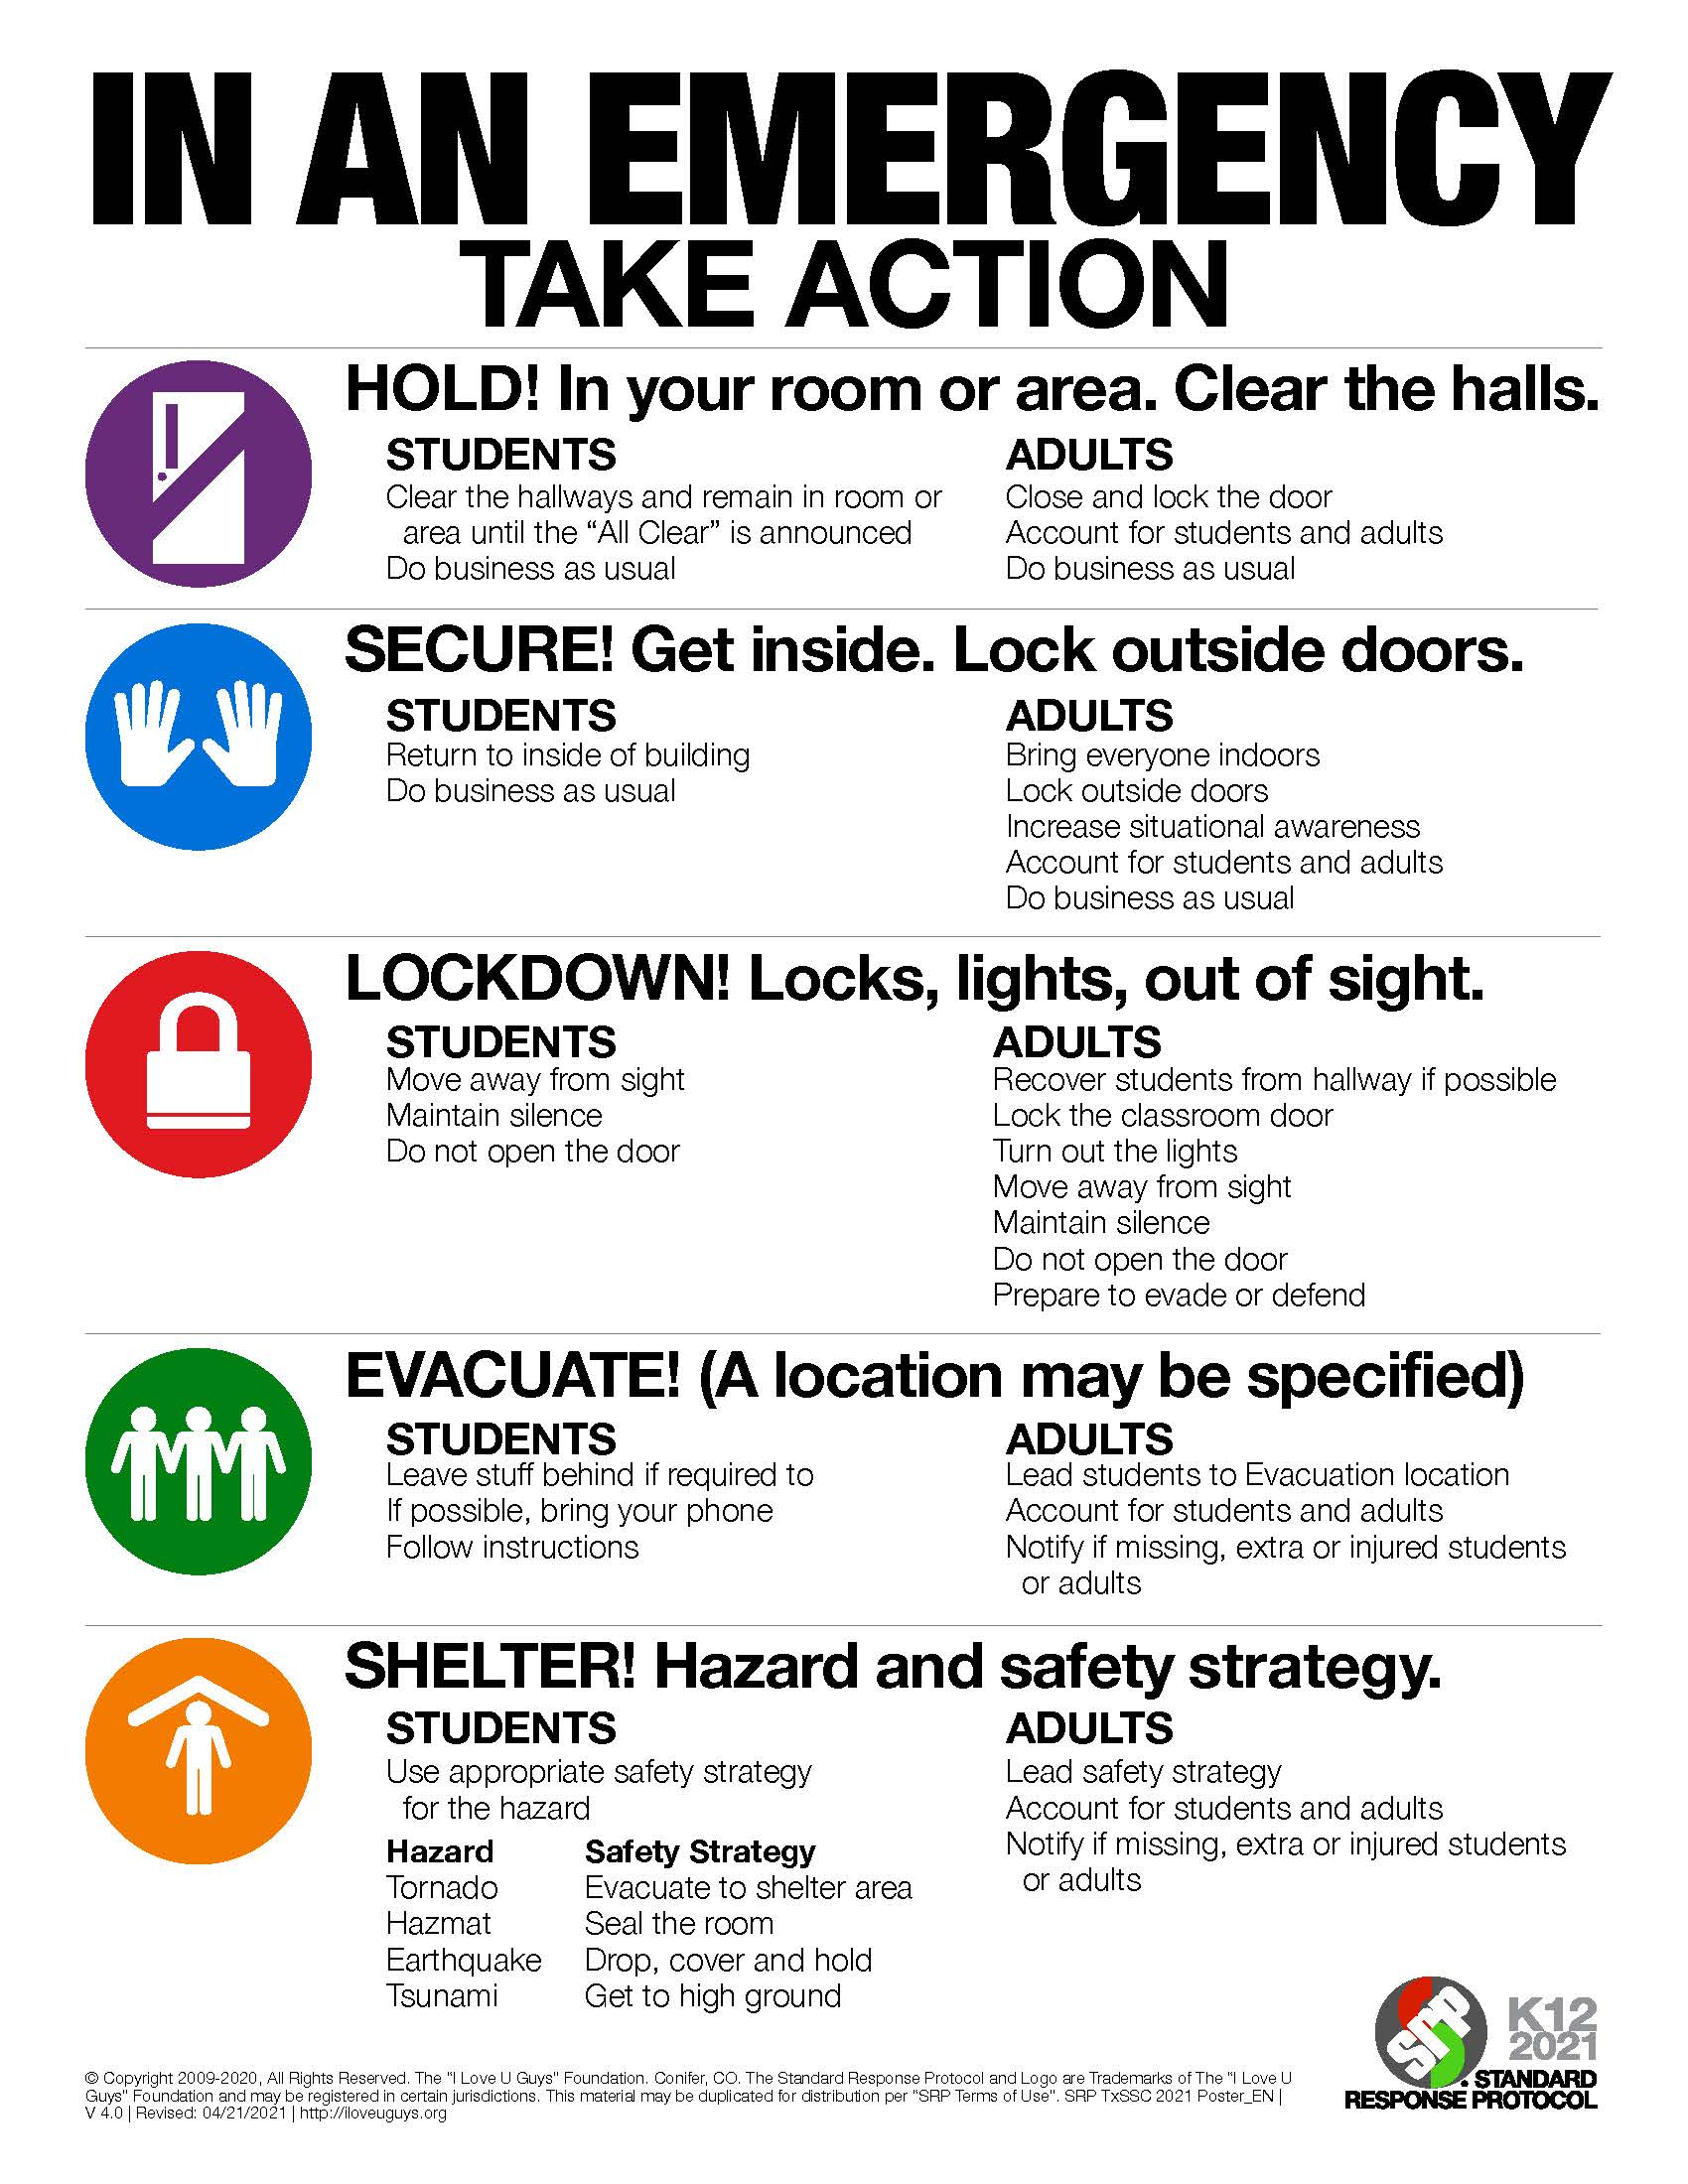 In an Emergency poster: Take Action. Hold! In your room or area, clear the halls. Secure! Get inside and lock outside doors. Lockdown! Locks, lights, out of sight. Evacuate! A location may be specified Shelter! Hazard and safety strategy. 